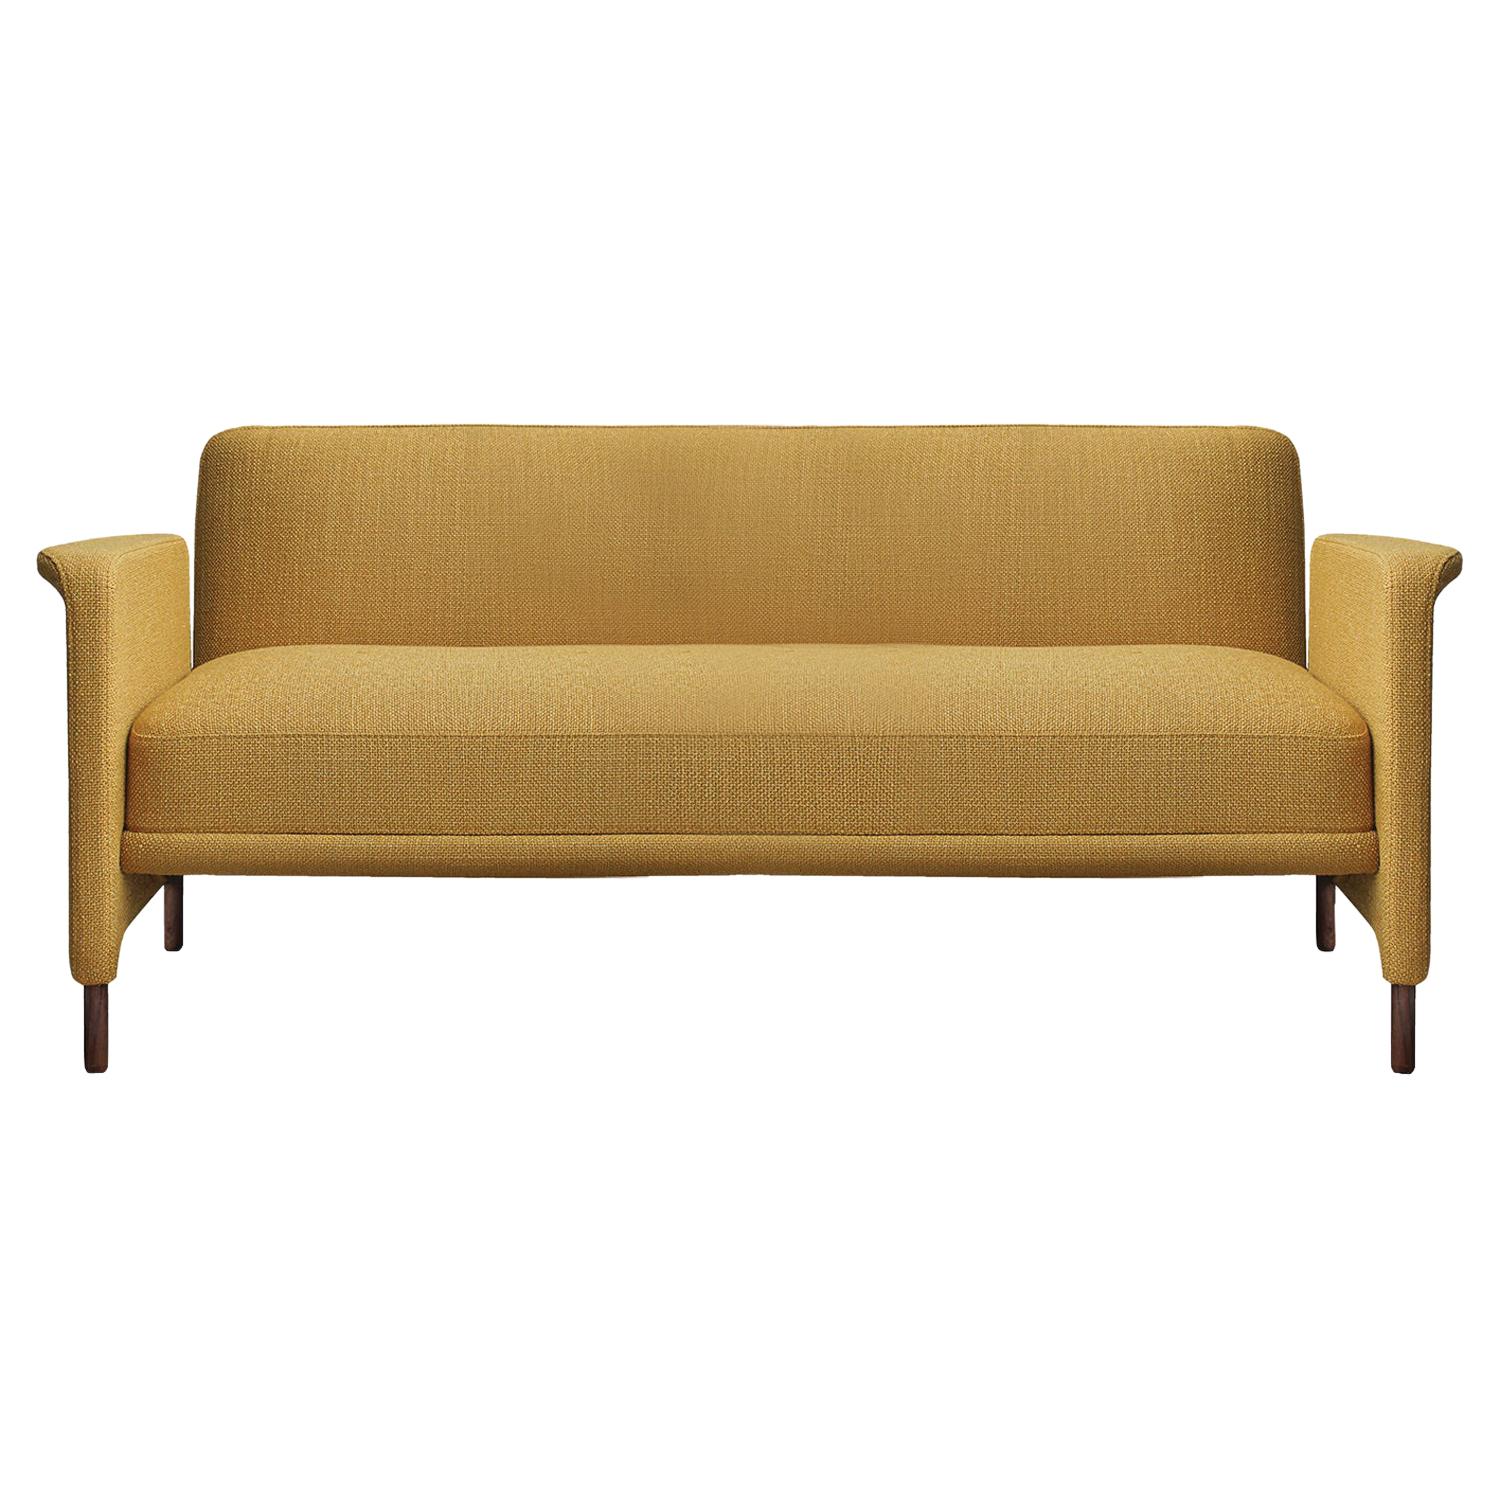 Contemporary Modern Carson 2 Seat Sofa in Yellow Fabric by Collector Studio